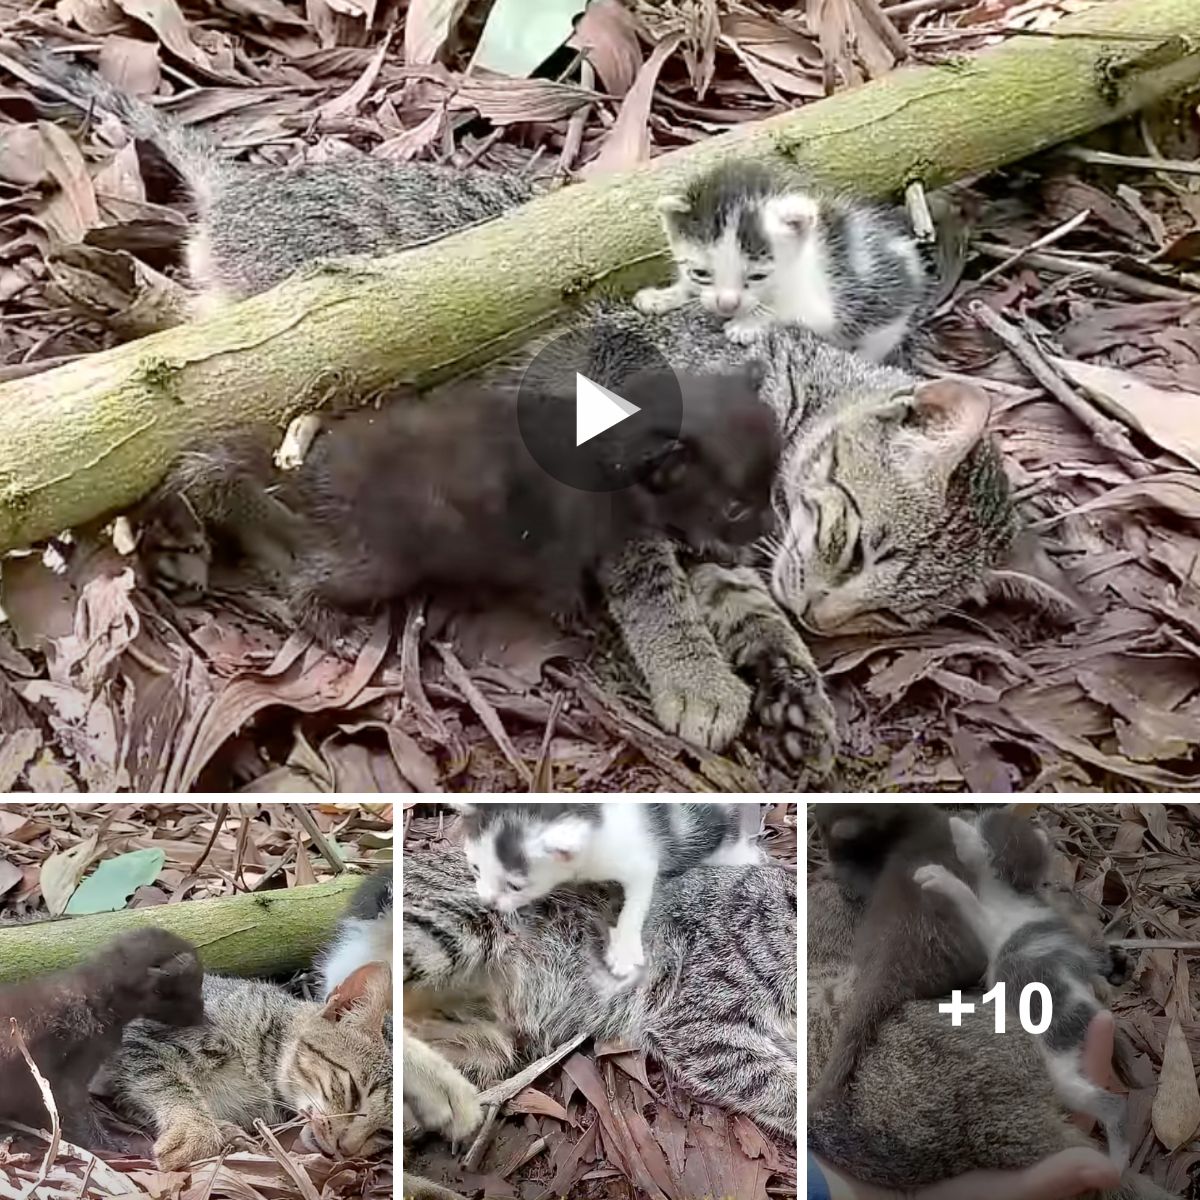 Tragedy Strikes: While the family was seeking shelter together, a large tree branch accidentally fell, pinning them down. A heart-wrenching moment as the two kittens scream in tears, overwhelmed by concern for their mother.